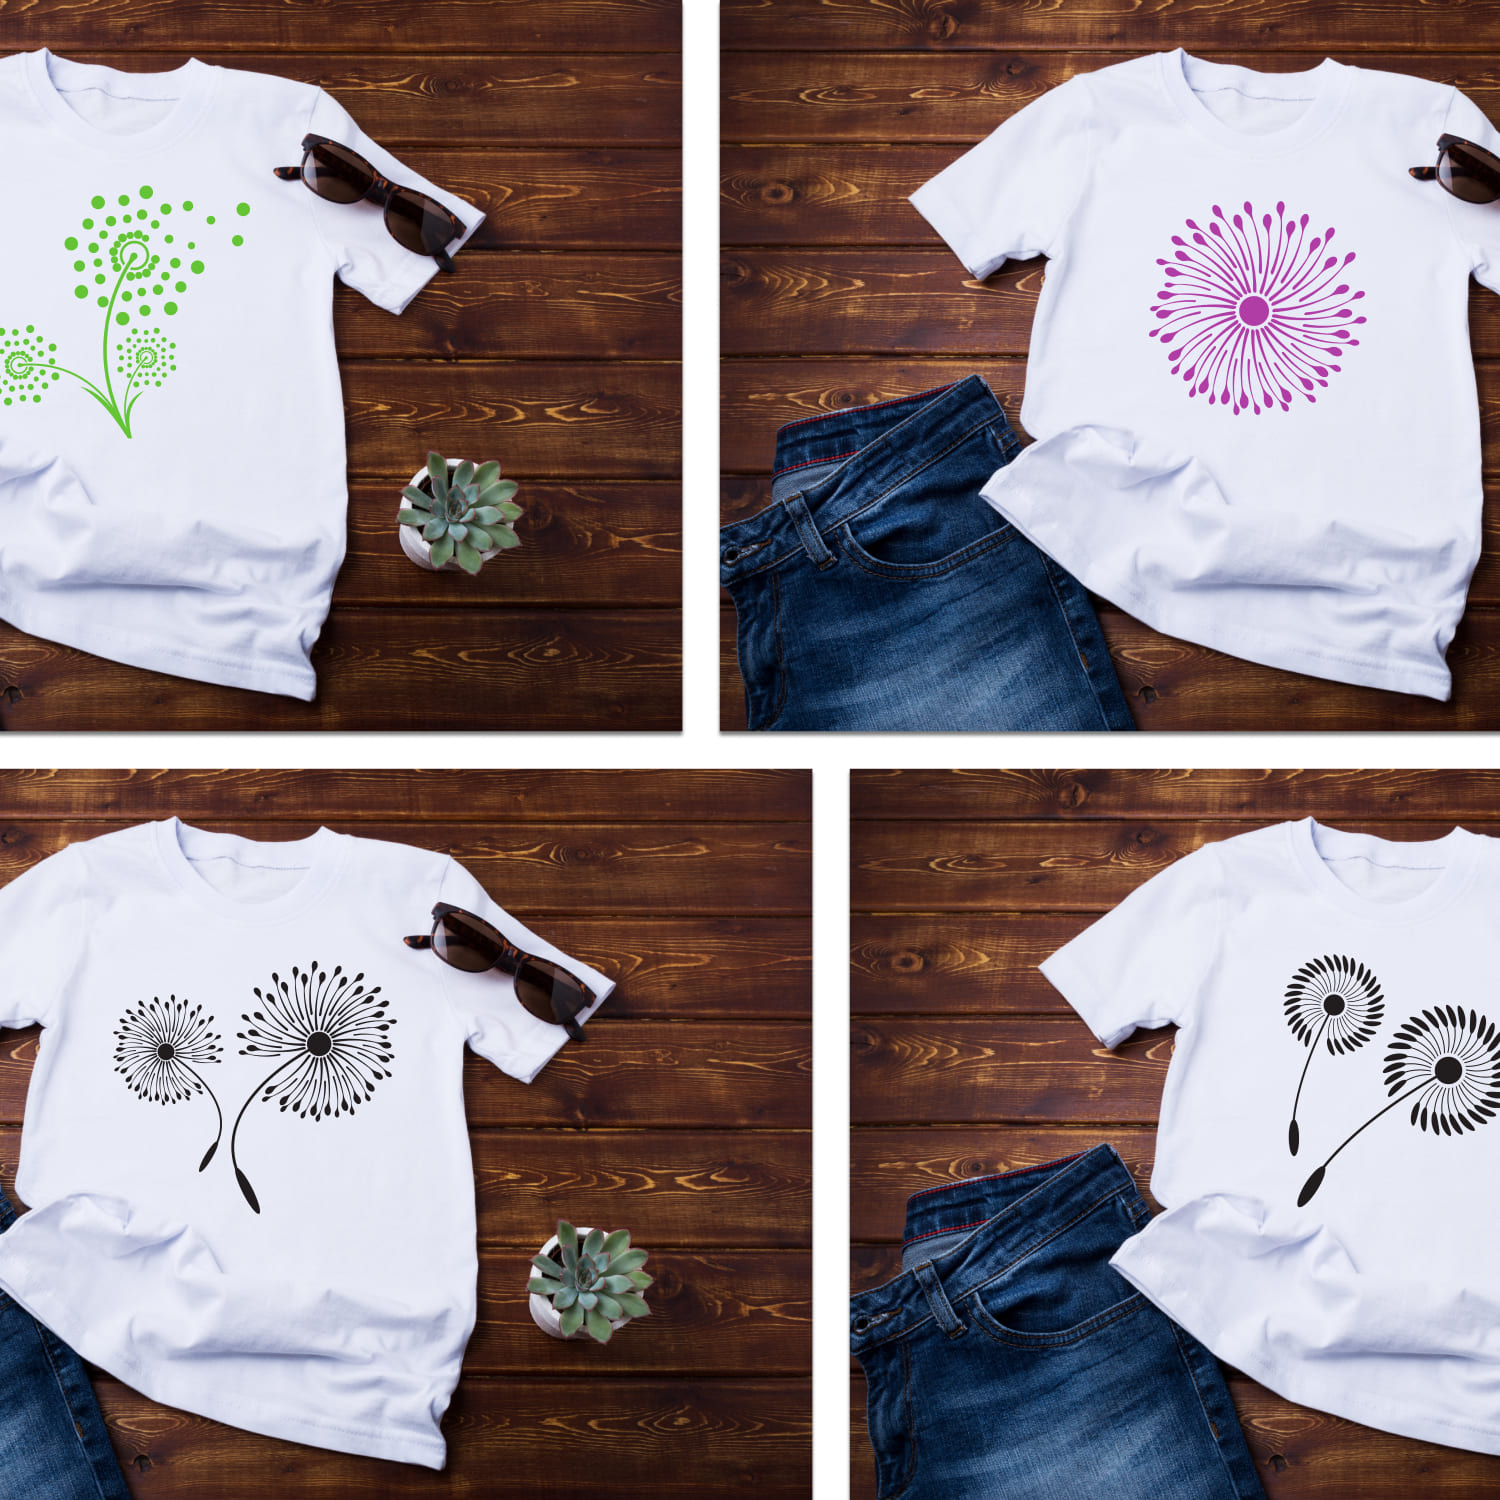 Set with images of t-shirts with gorgeous dandelion prints.